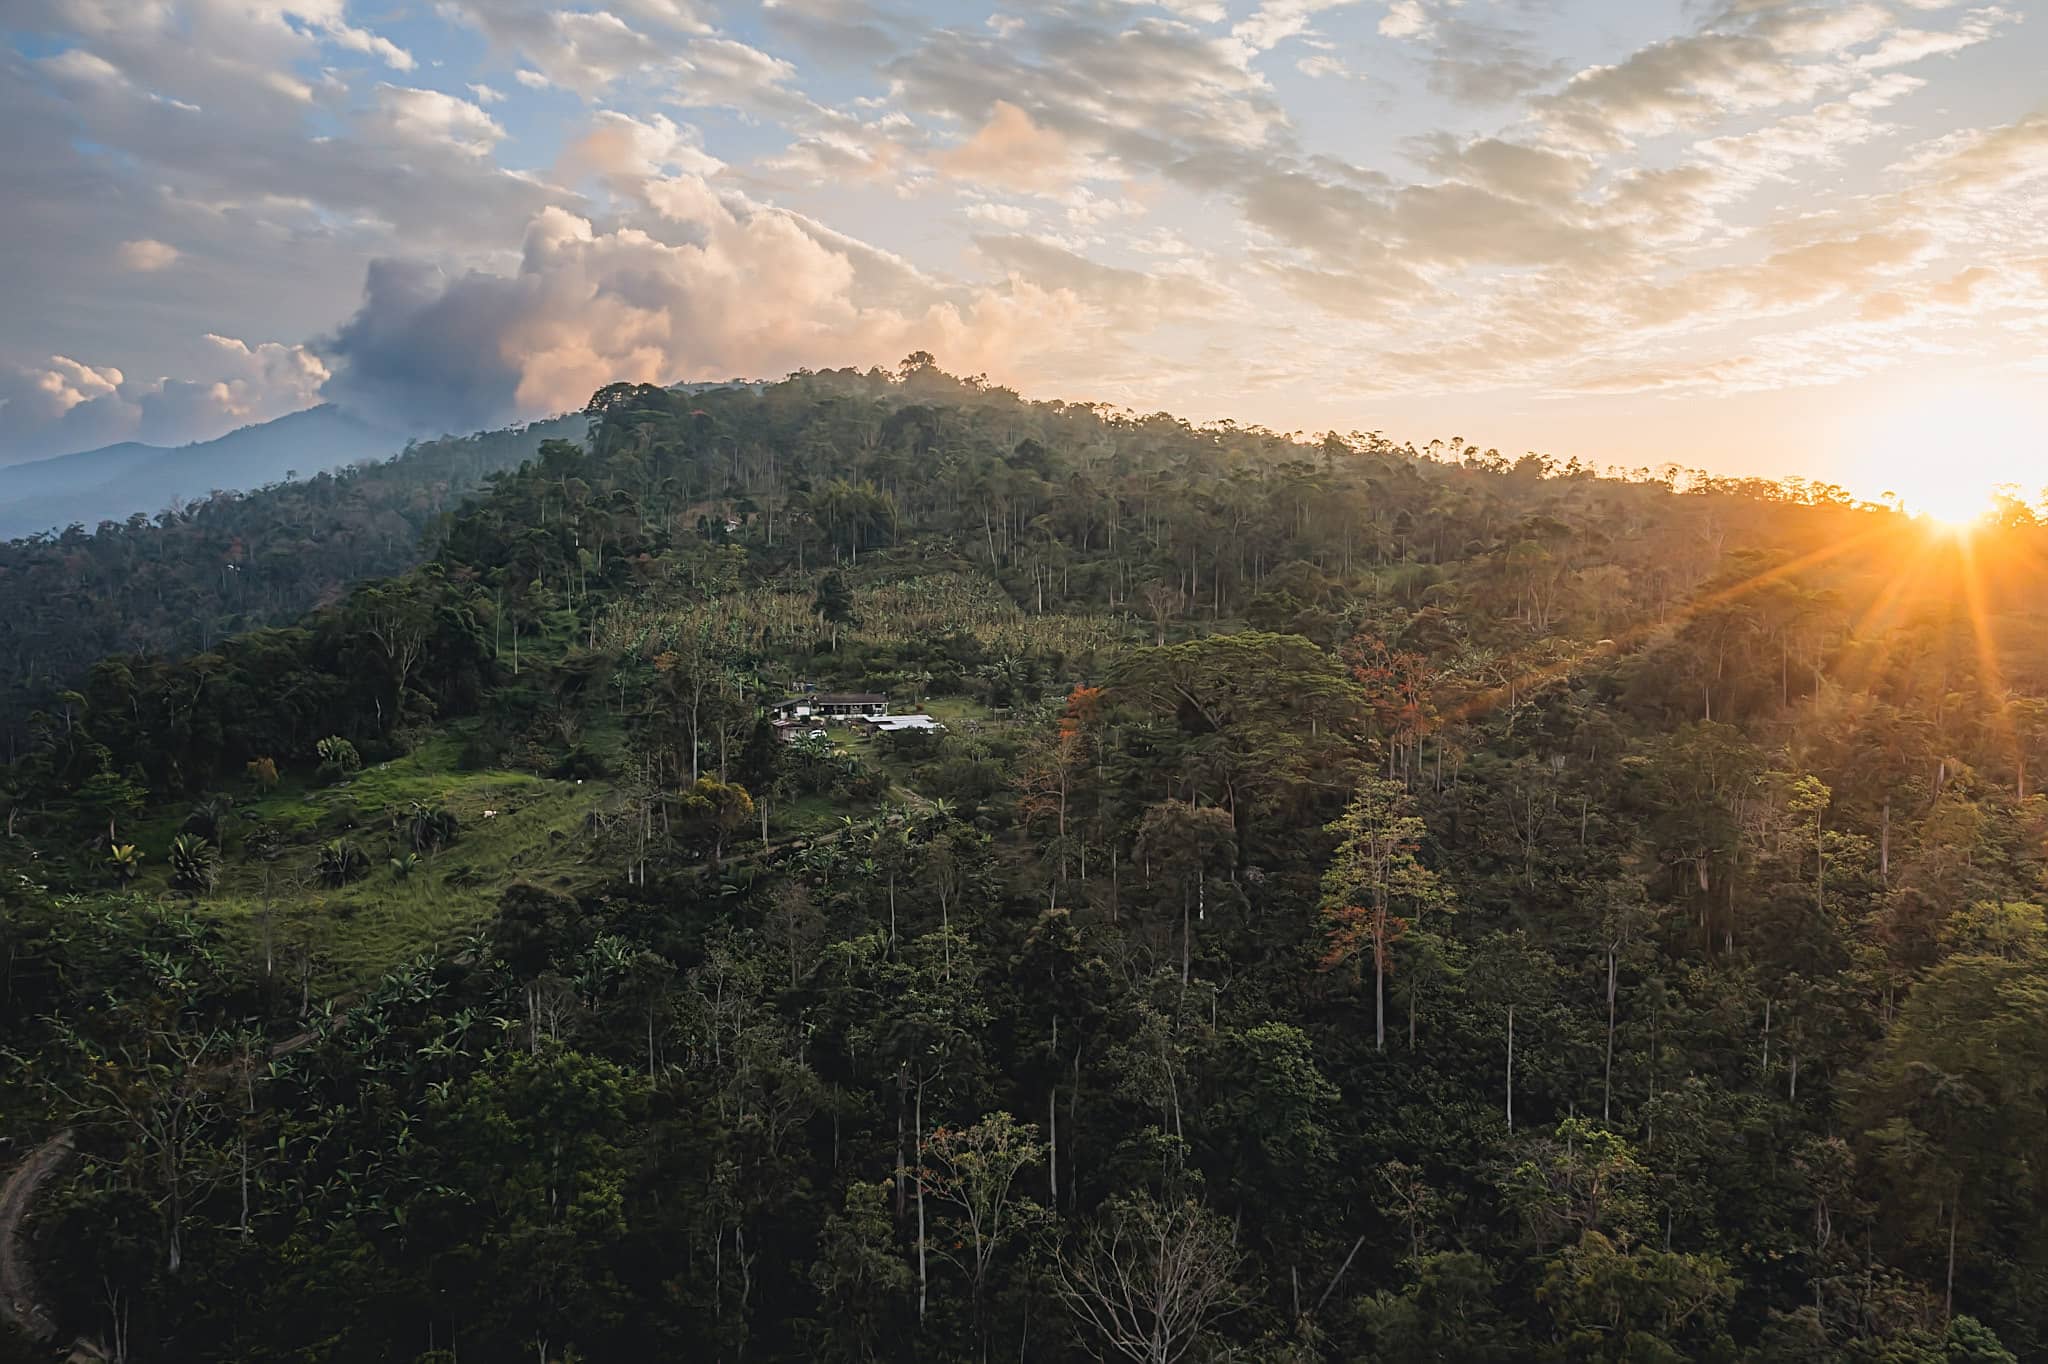 sunset over cocoa agroforestry plantations in the santander region of colombia